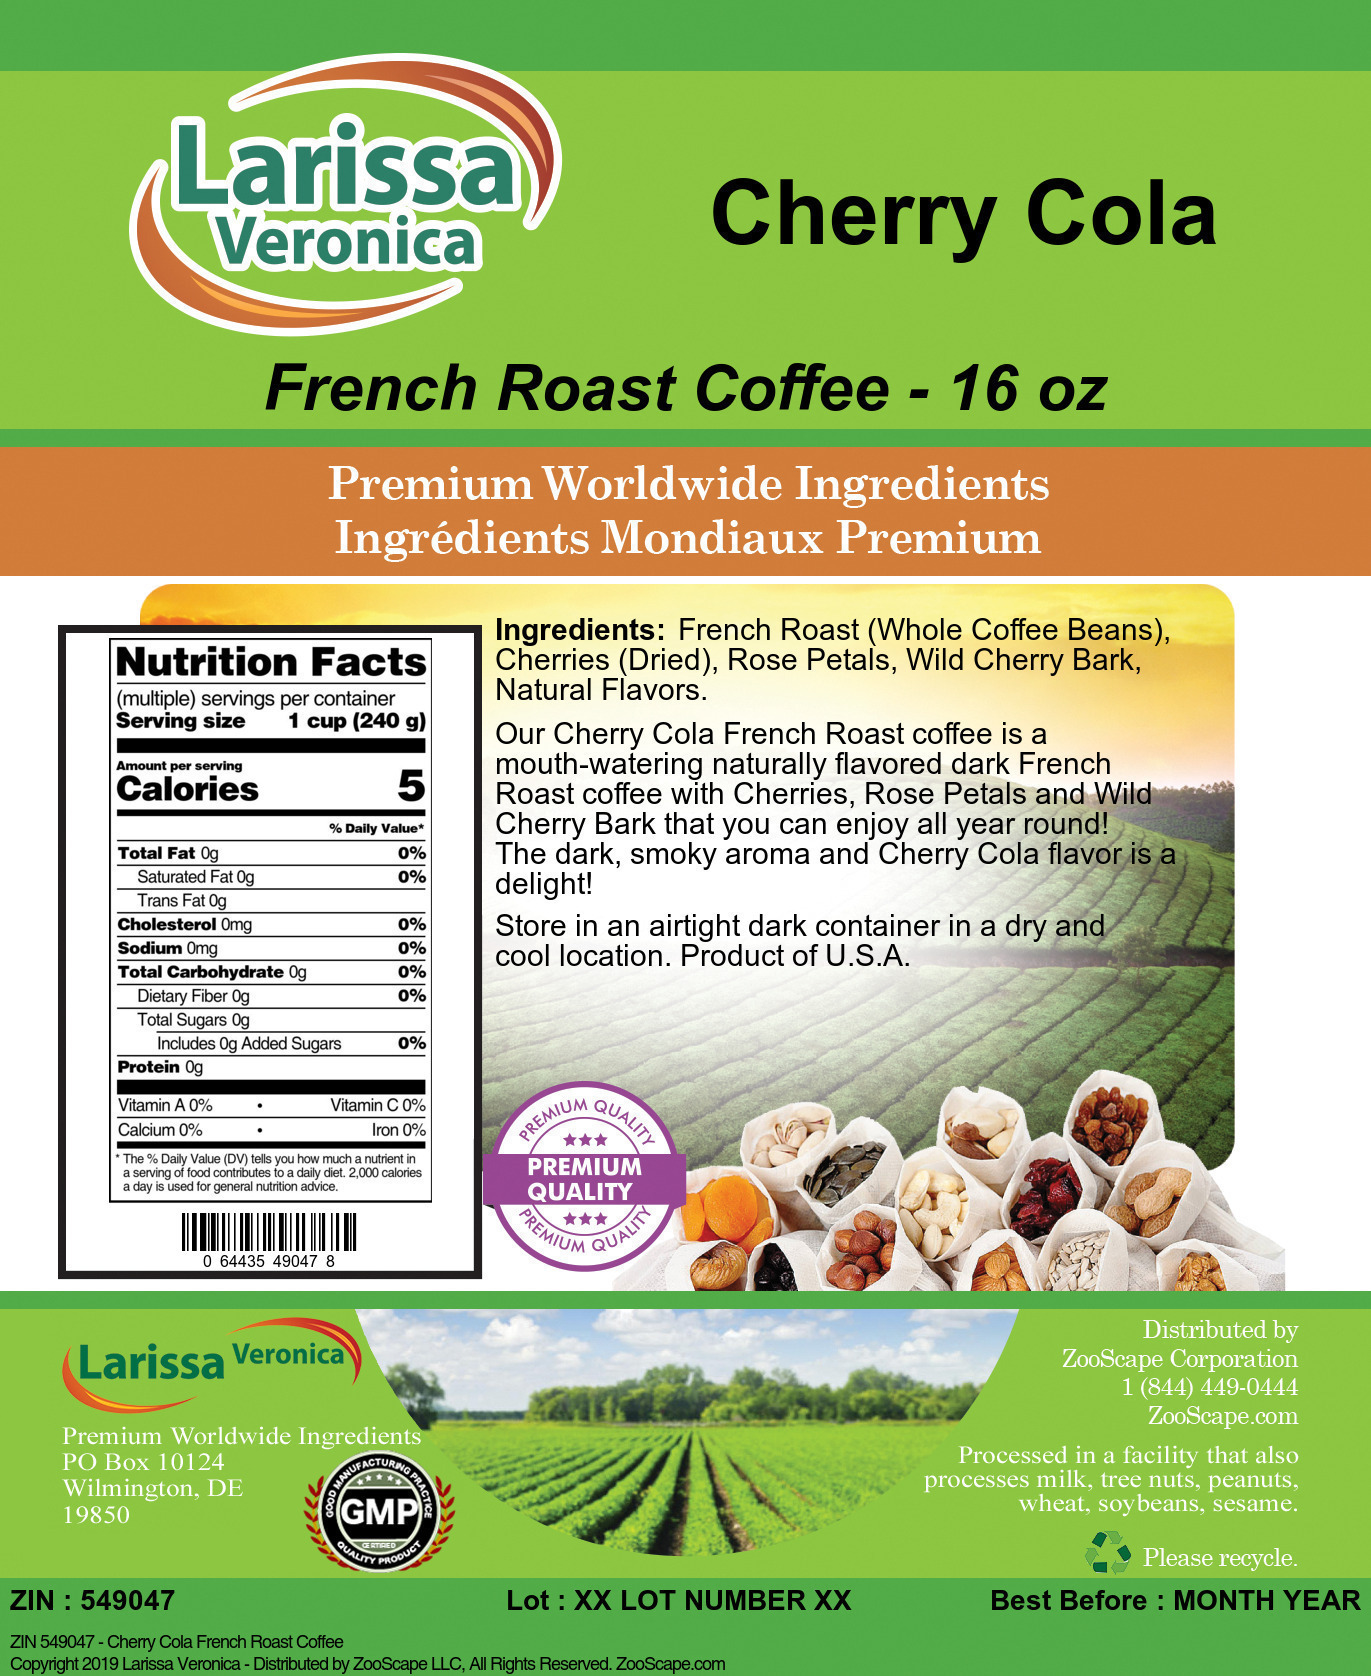 Cherry Cola French Roast Coffee - Label